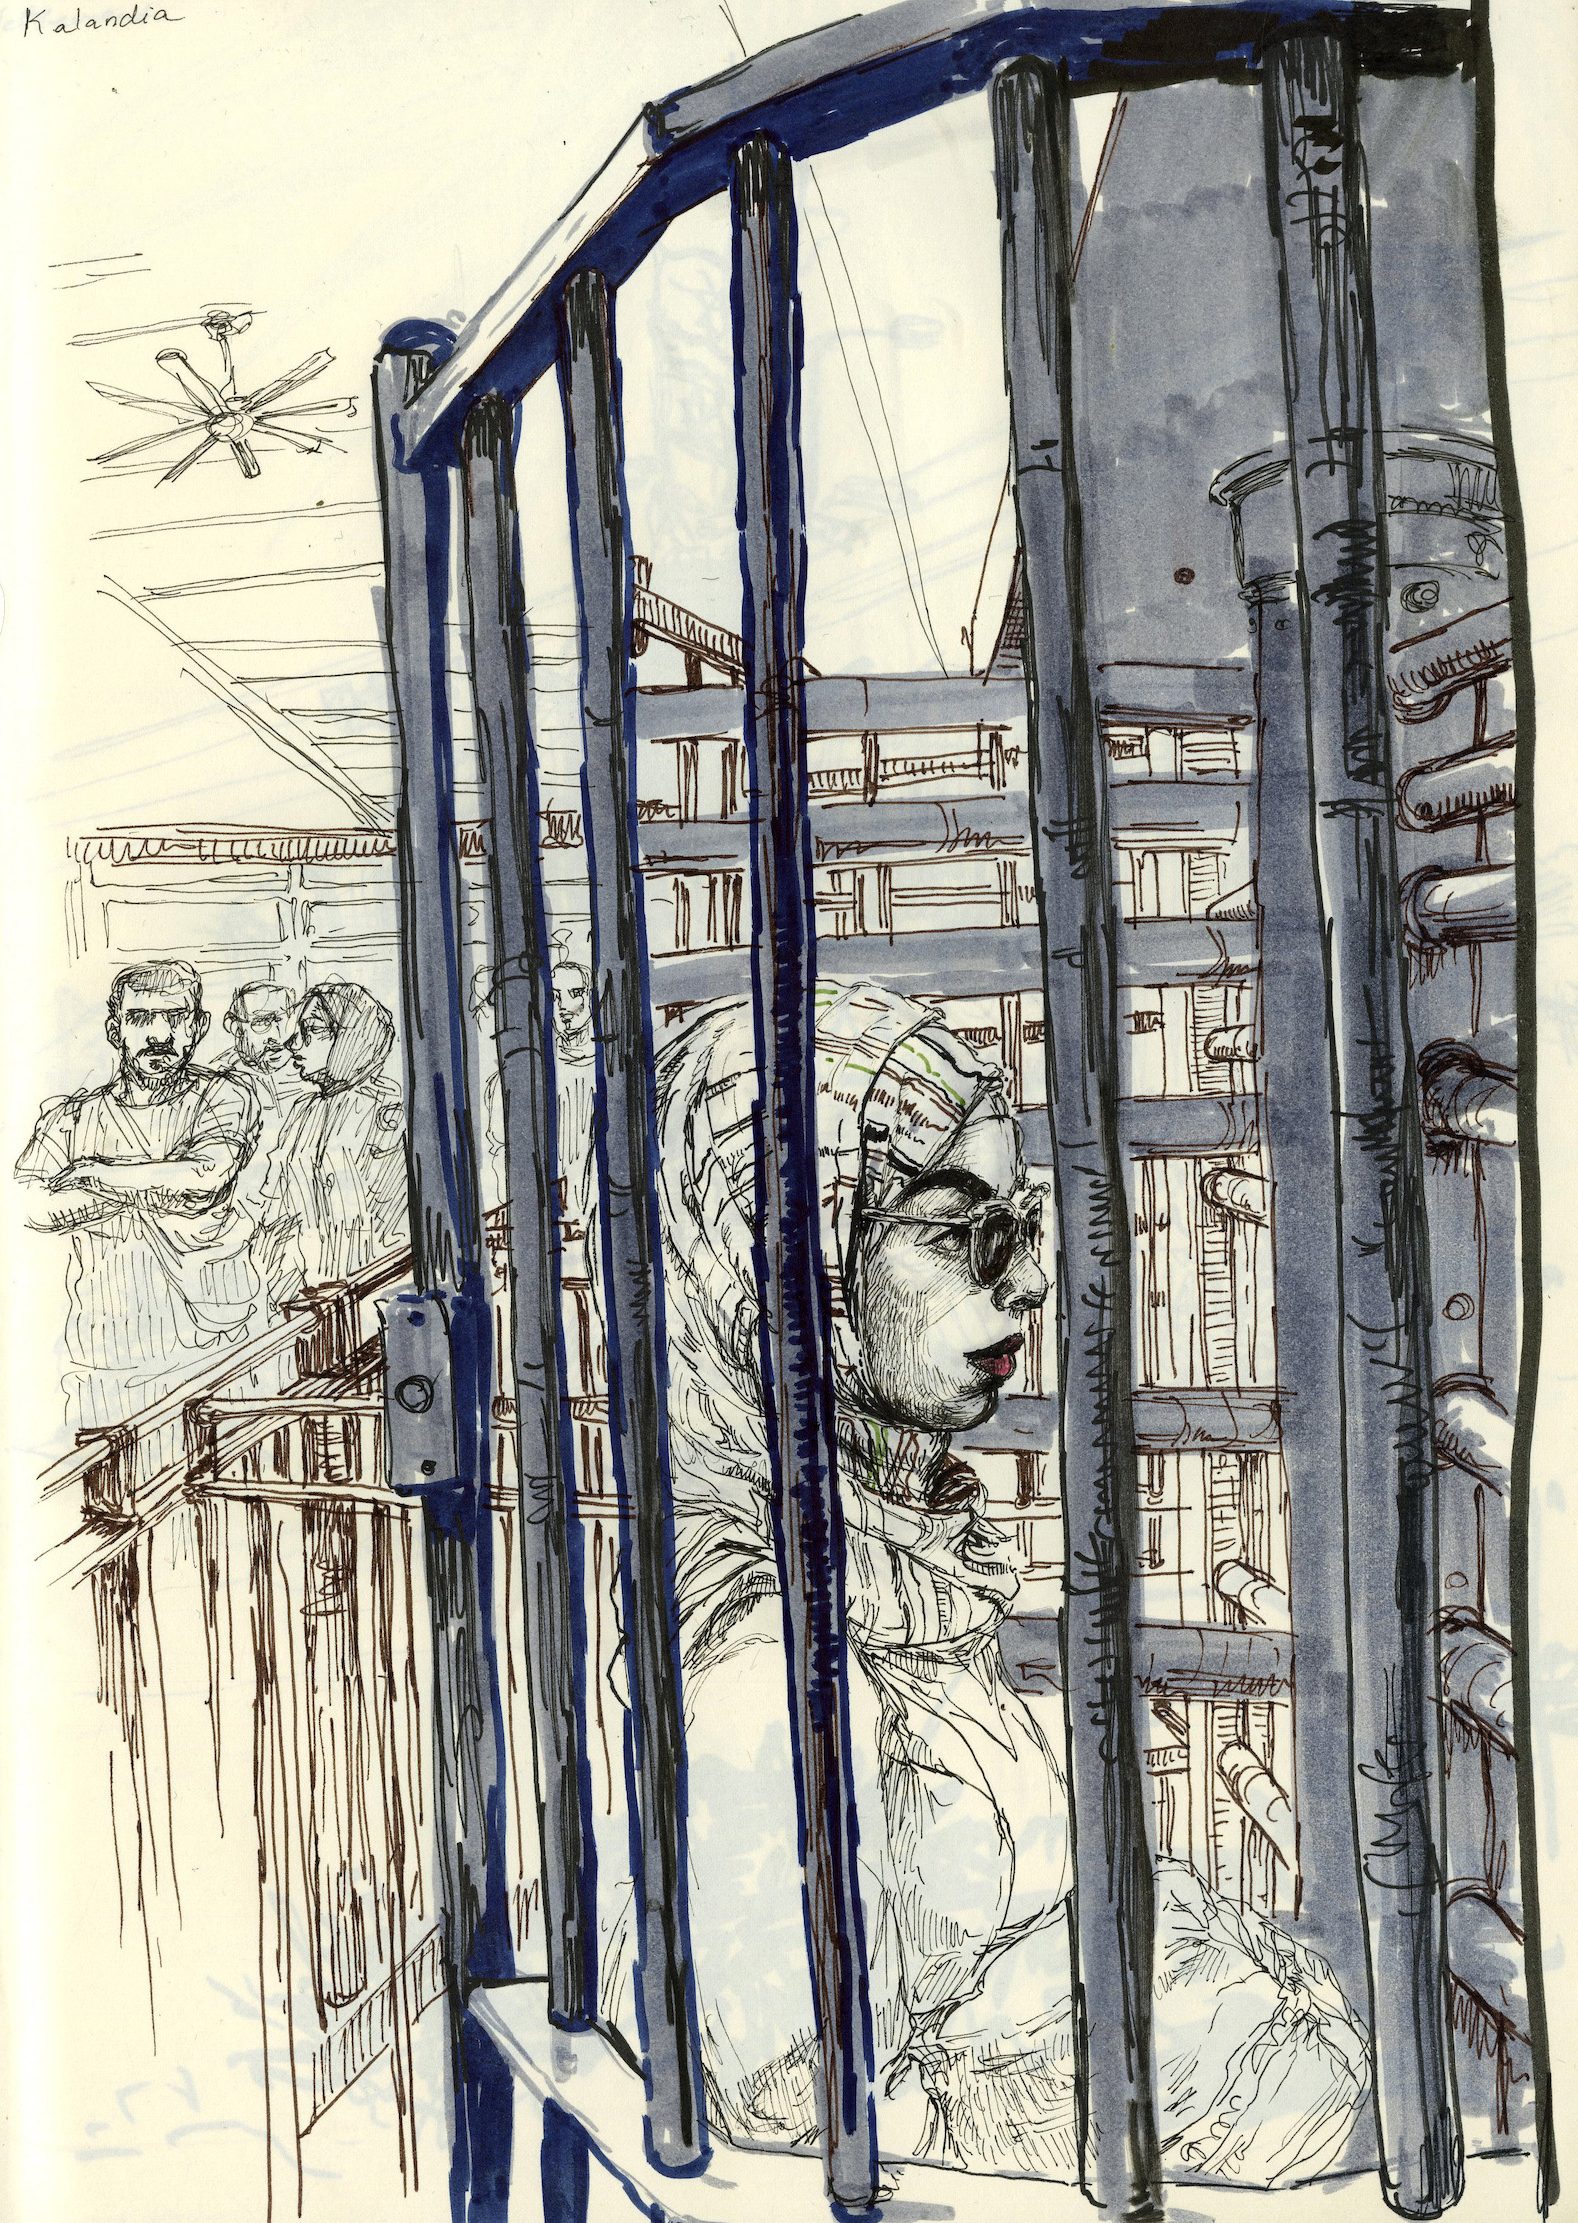 Drawing of a woman in a headscarf stands in a cage-like turnstile